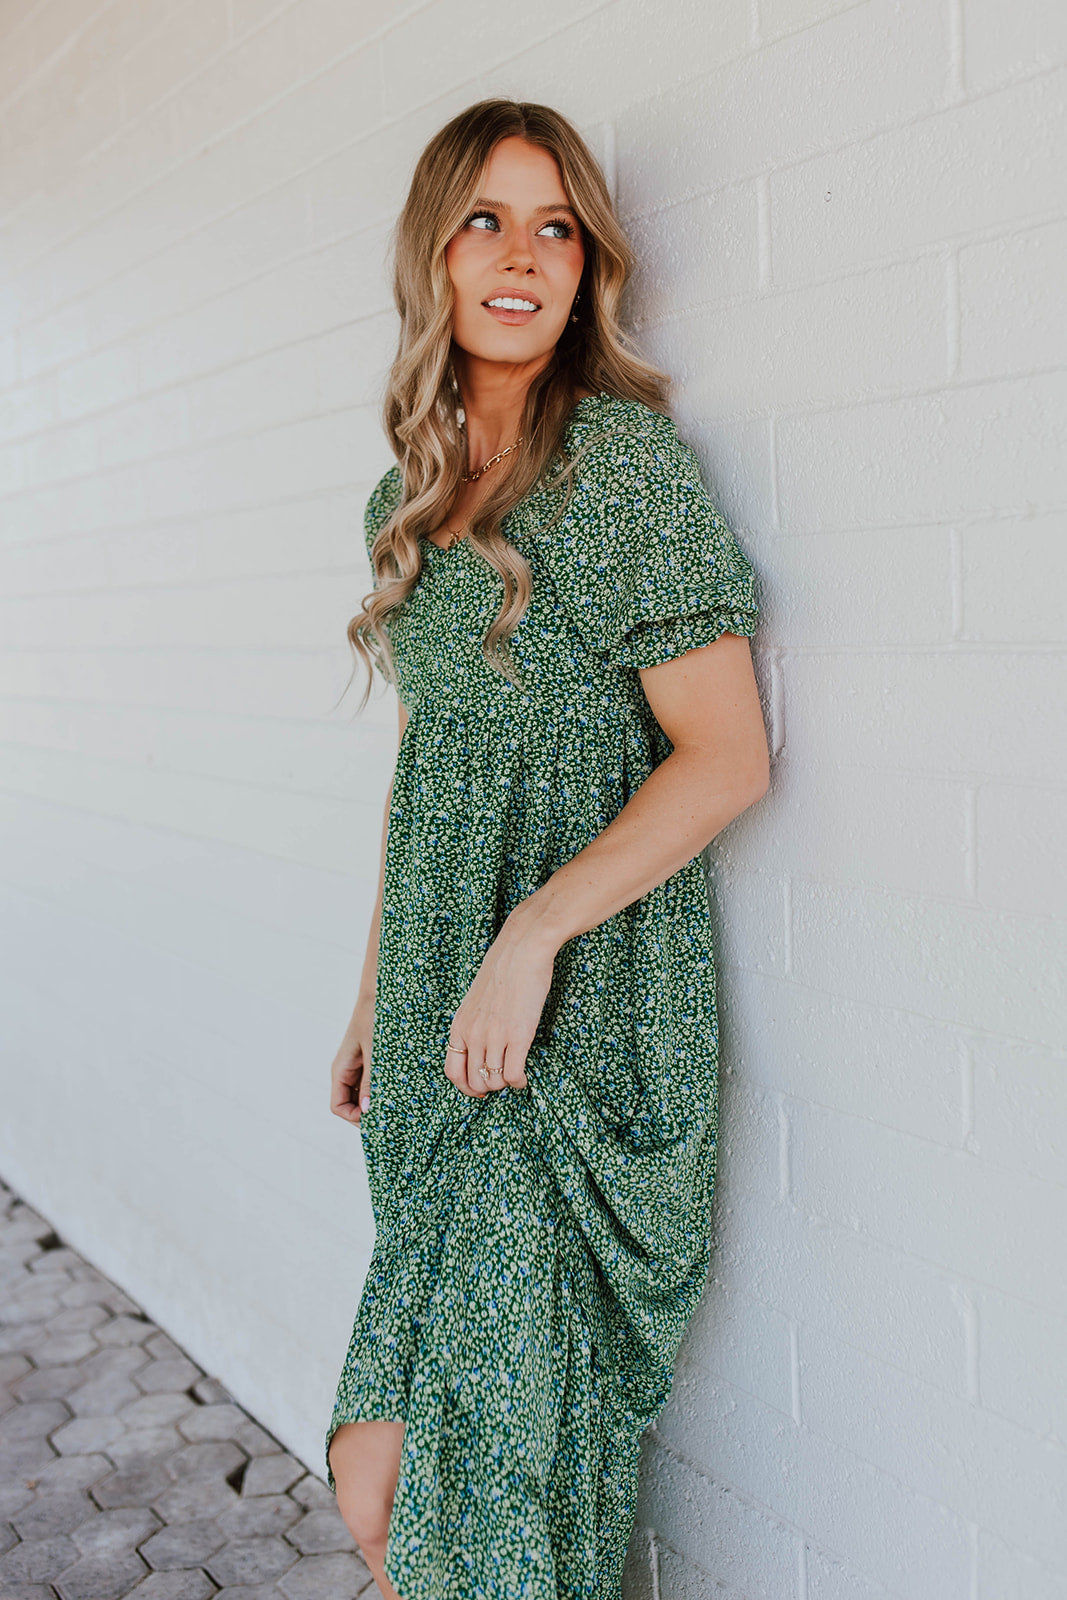 THE EMMALINE DRESS IN PINE GREEN FLORAL BY PINK DESERT